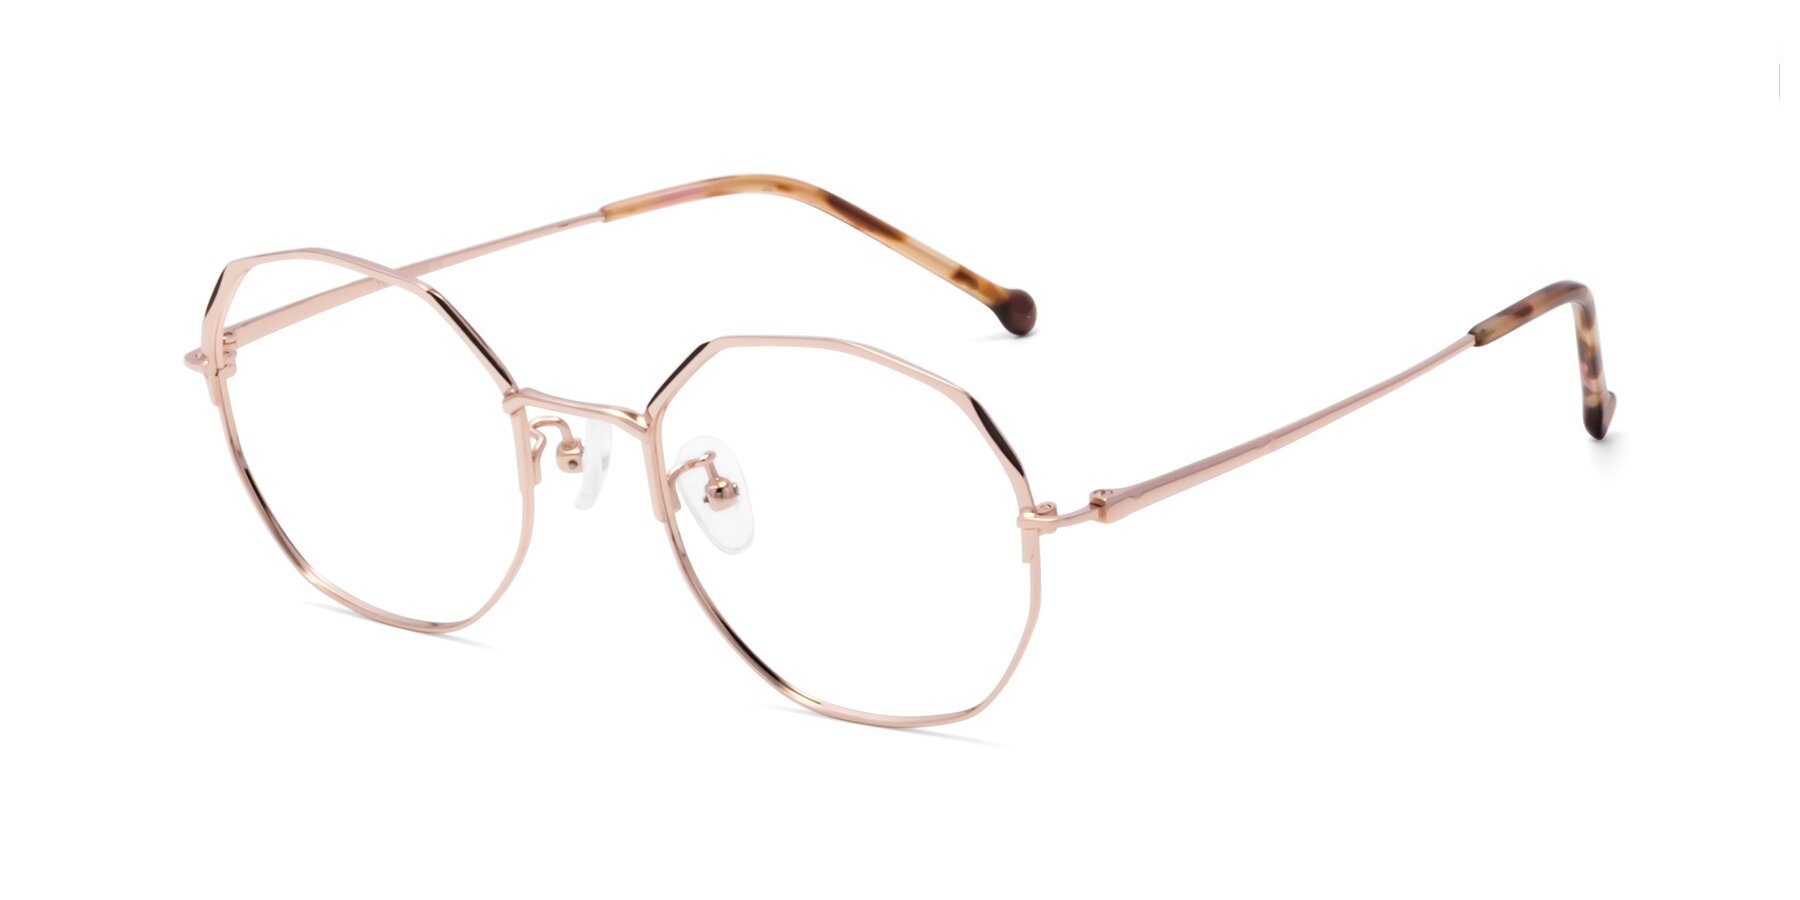 Angle of 18020 in Rose Gold with Clear Reading Eyeglass Lenses